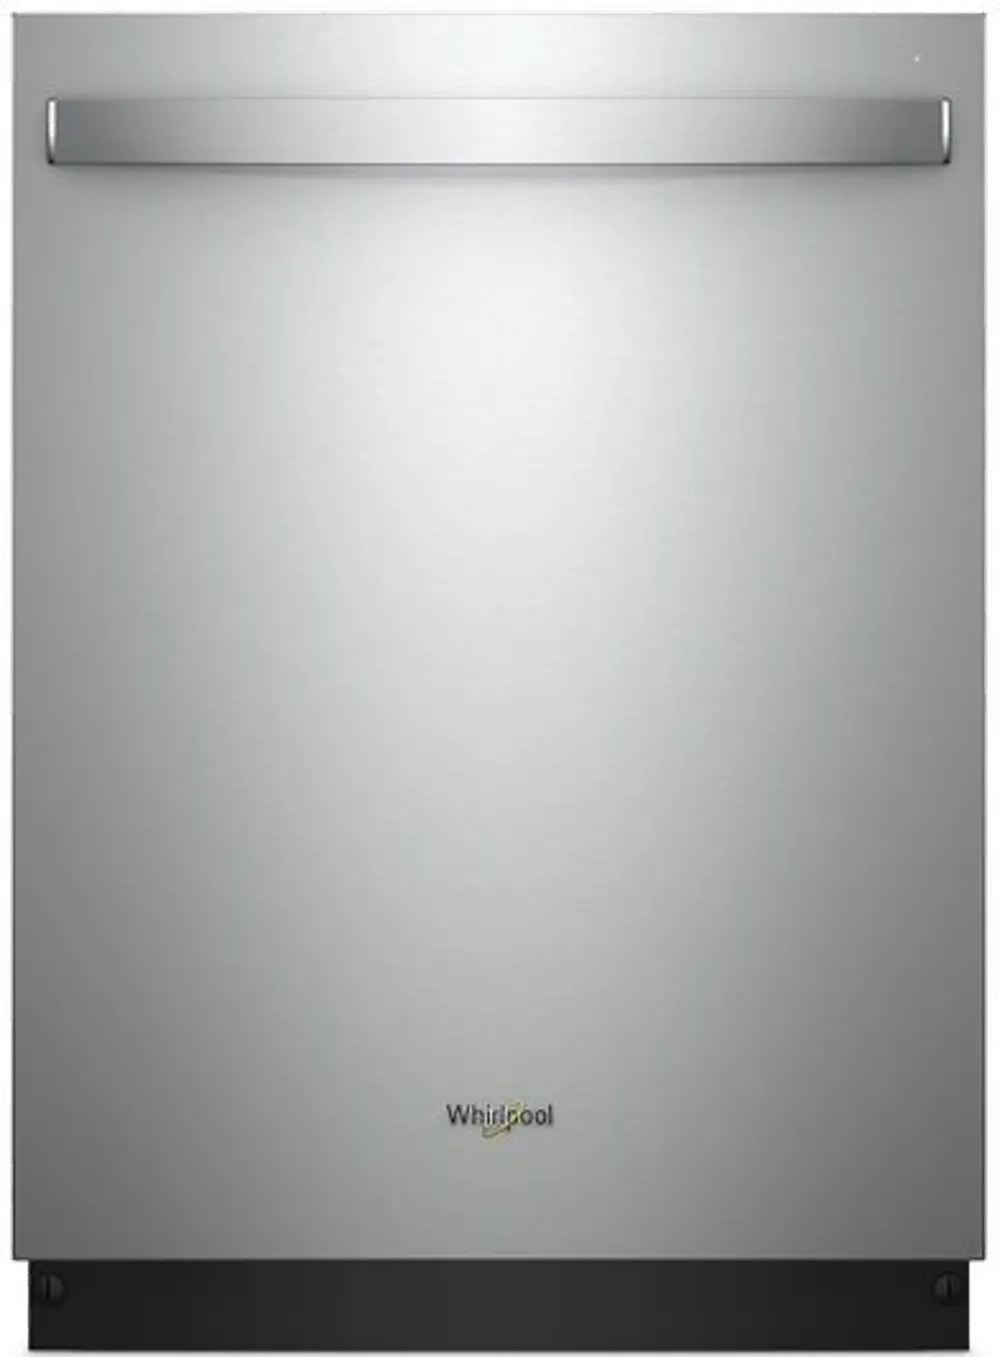 WDT750SAHZ Whirlpool Dishwasher - Smudge-Proof Stainless Steel-1